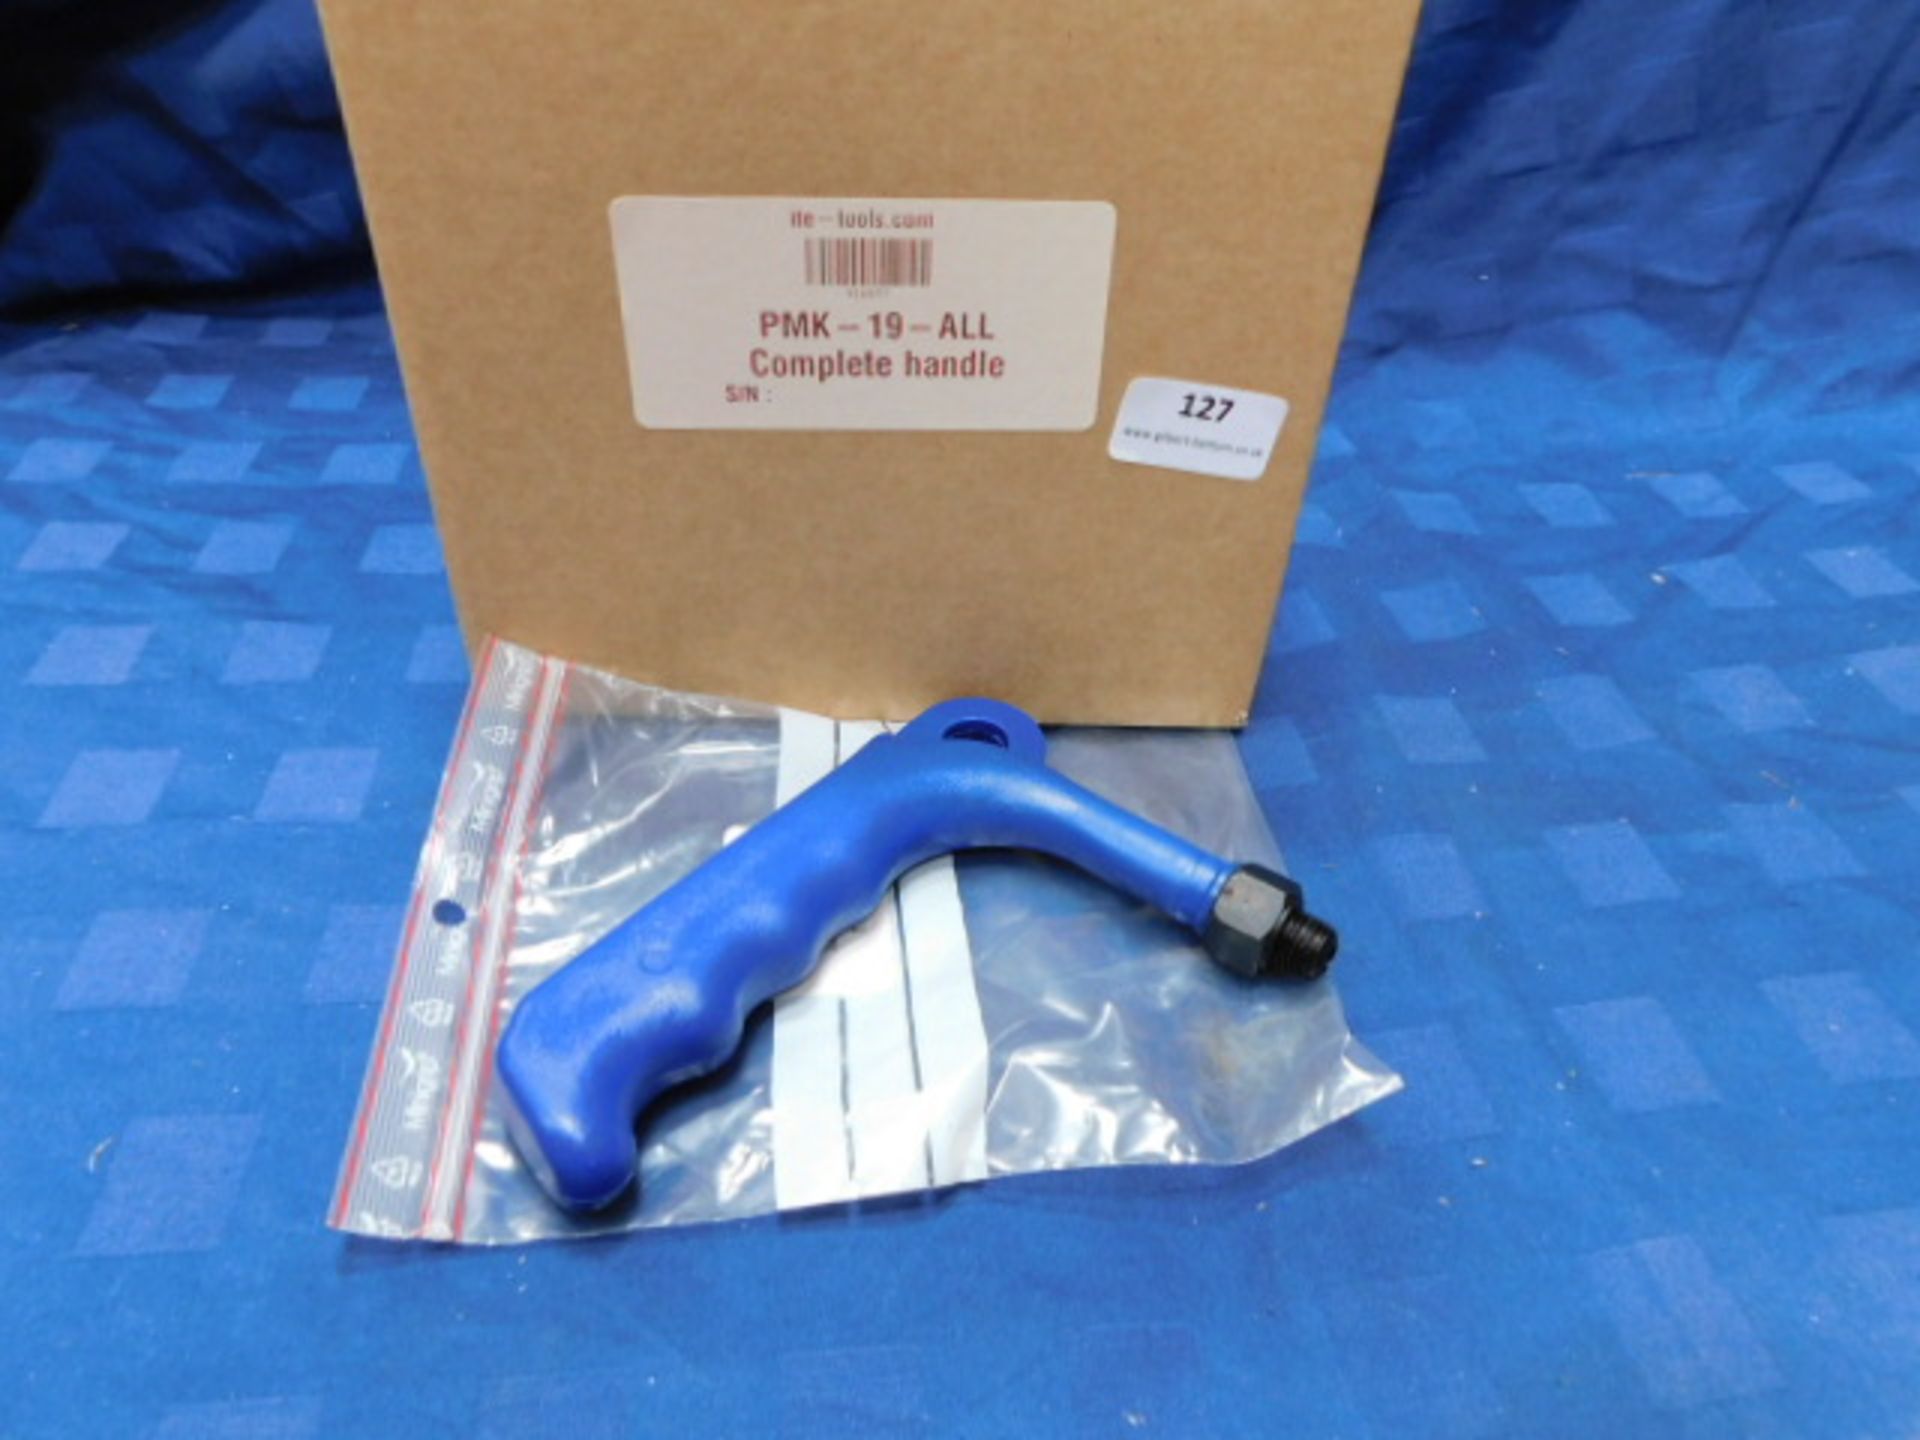 * PMK-19-ALL Complete handle all pumps